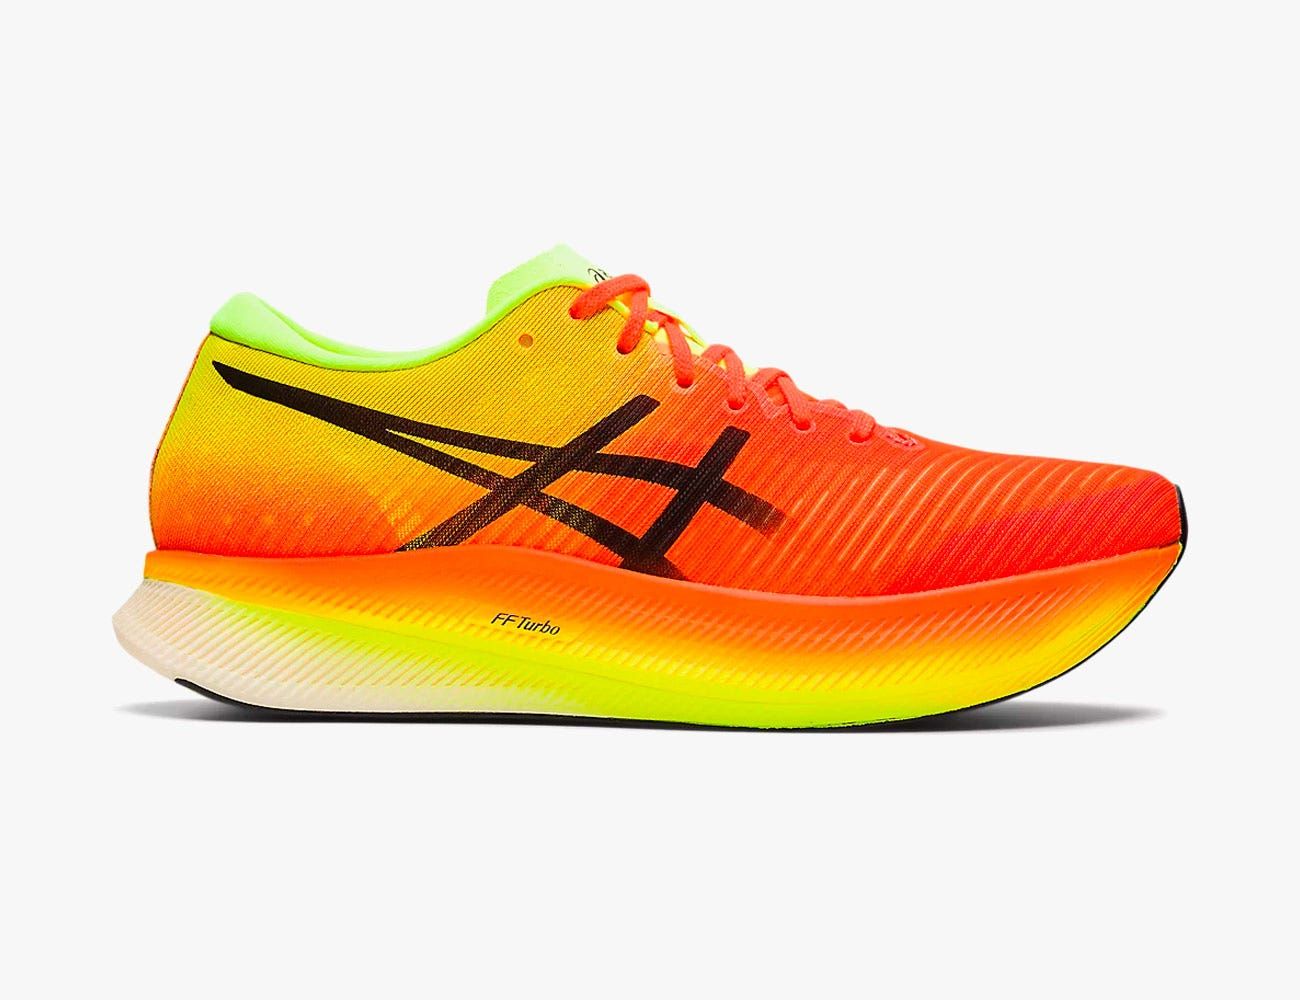 These Are the Shoes You Need to Run Your Fastest Mile